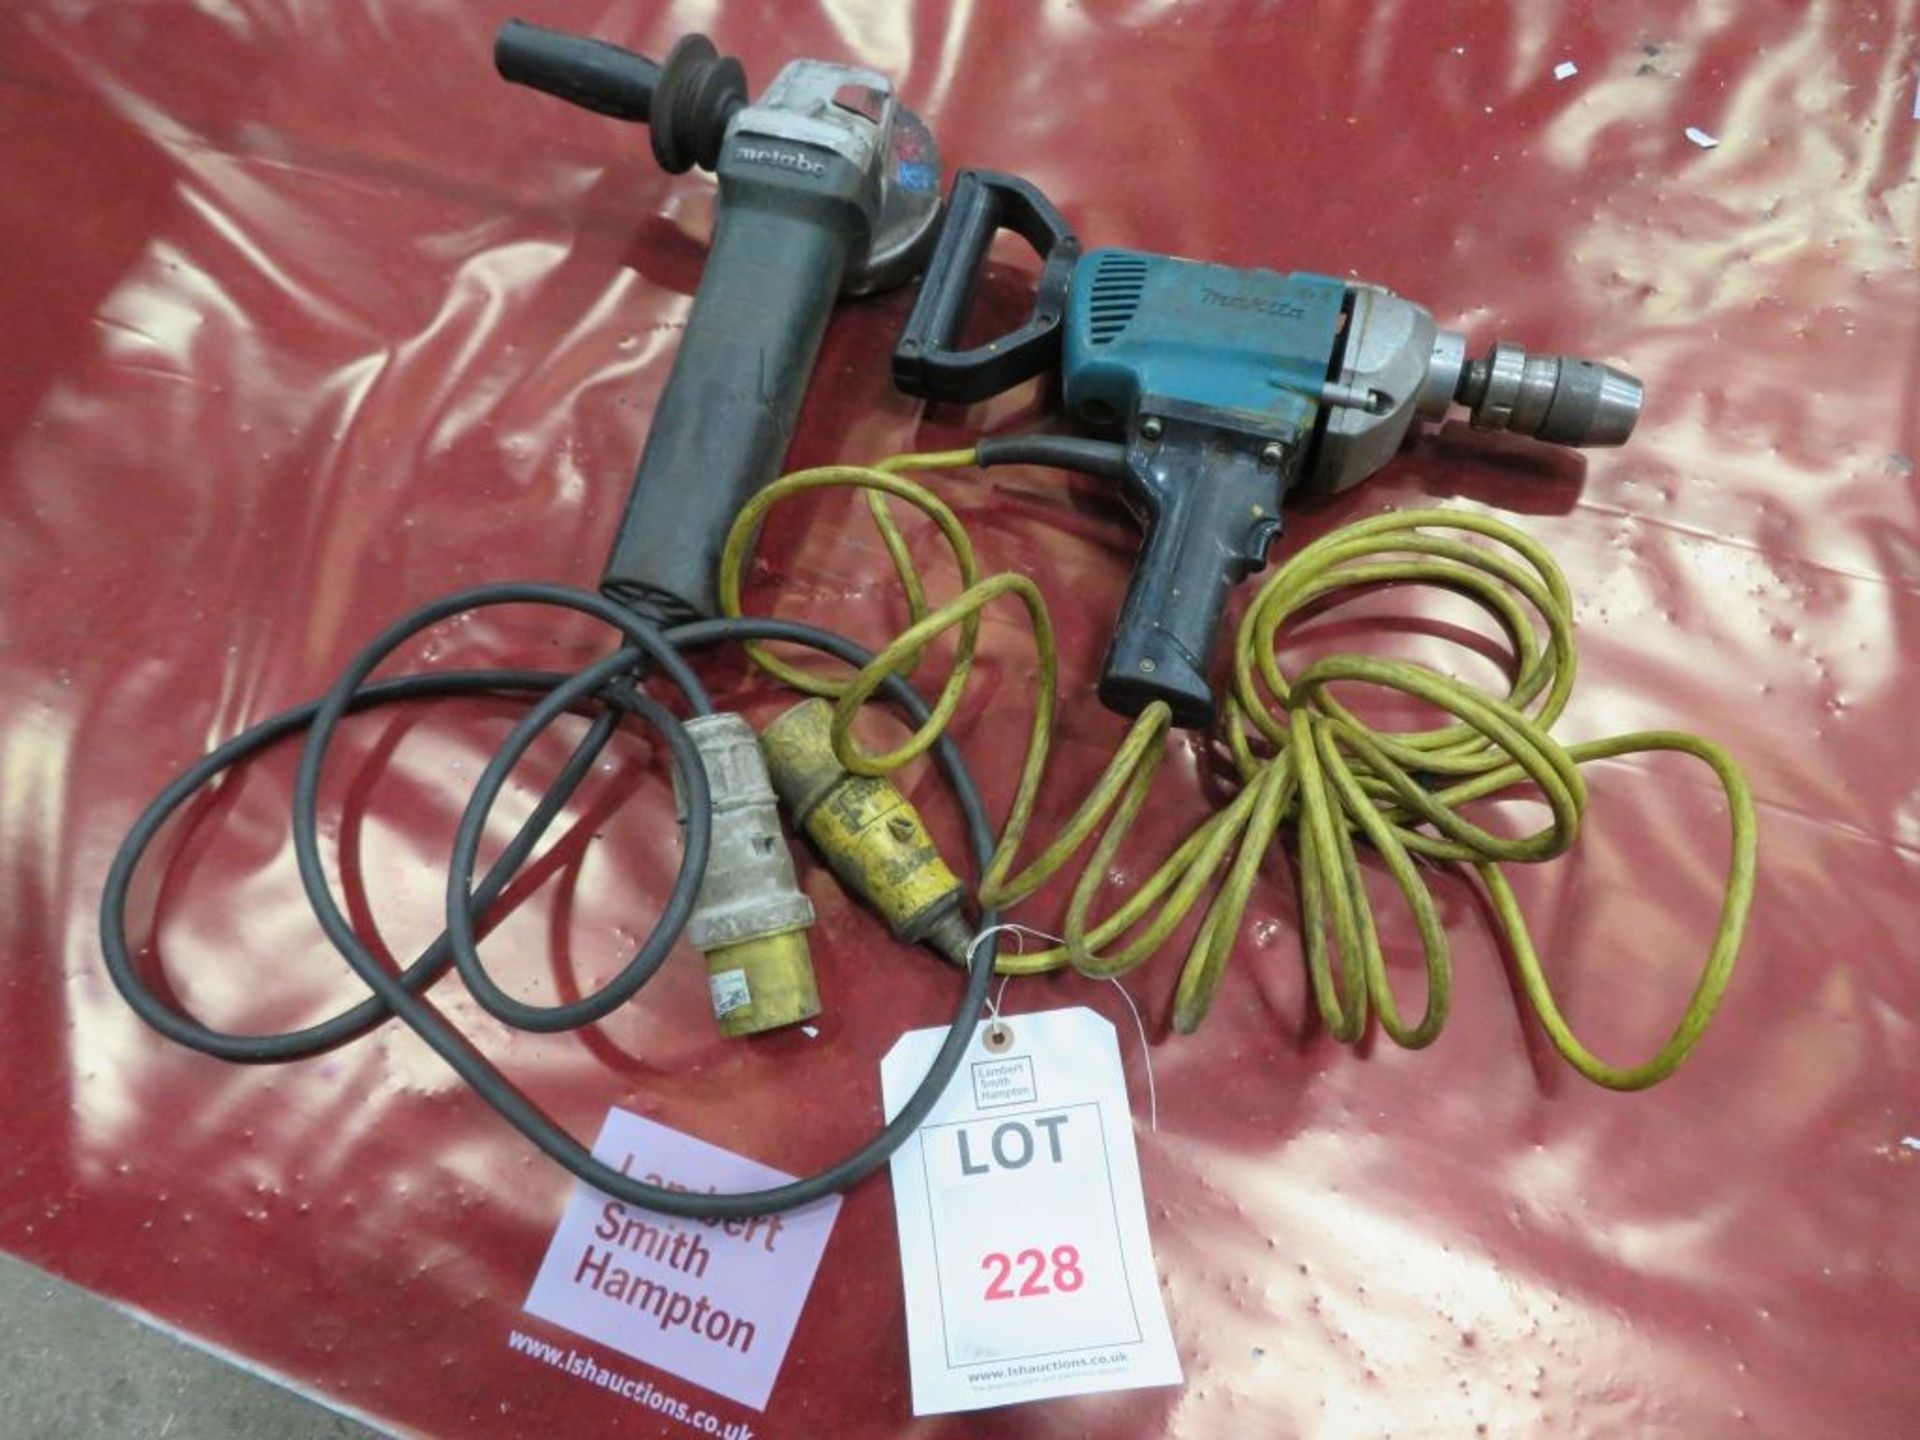 Corded Drill and angle grinder